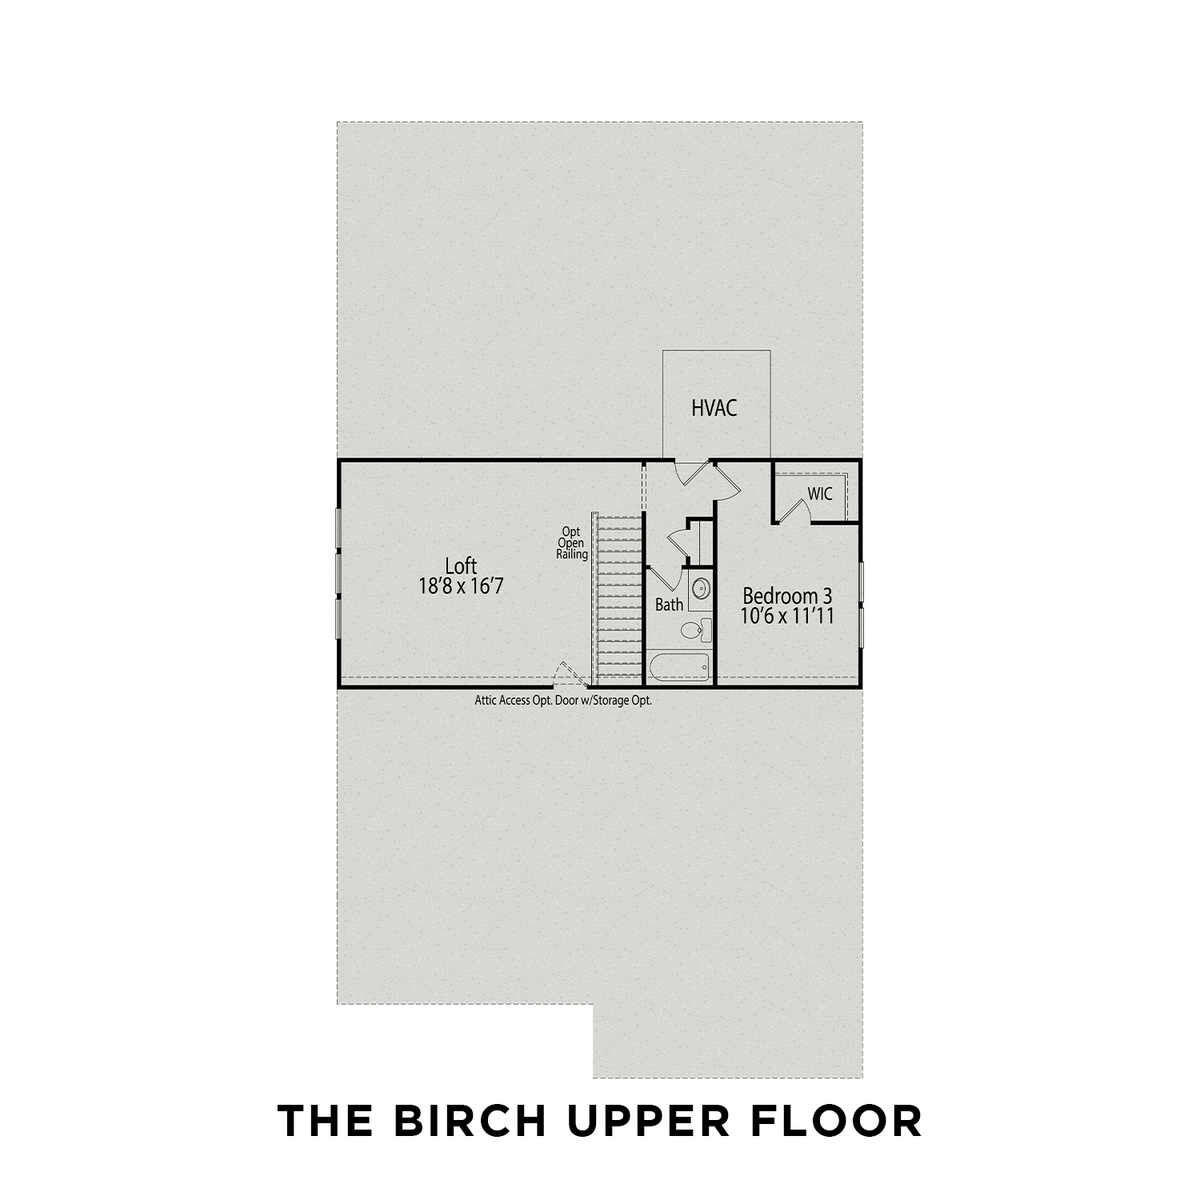 2 - The Birch B buildable floor plan layout in Davidson Homes' Carellton community.